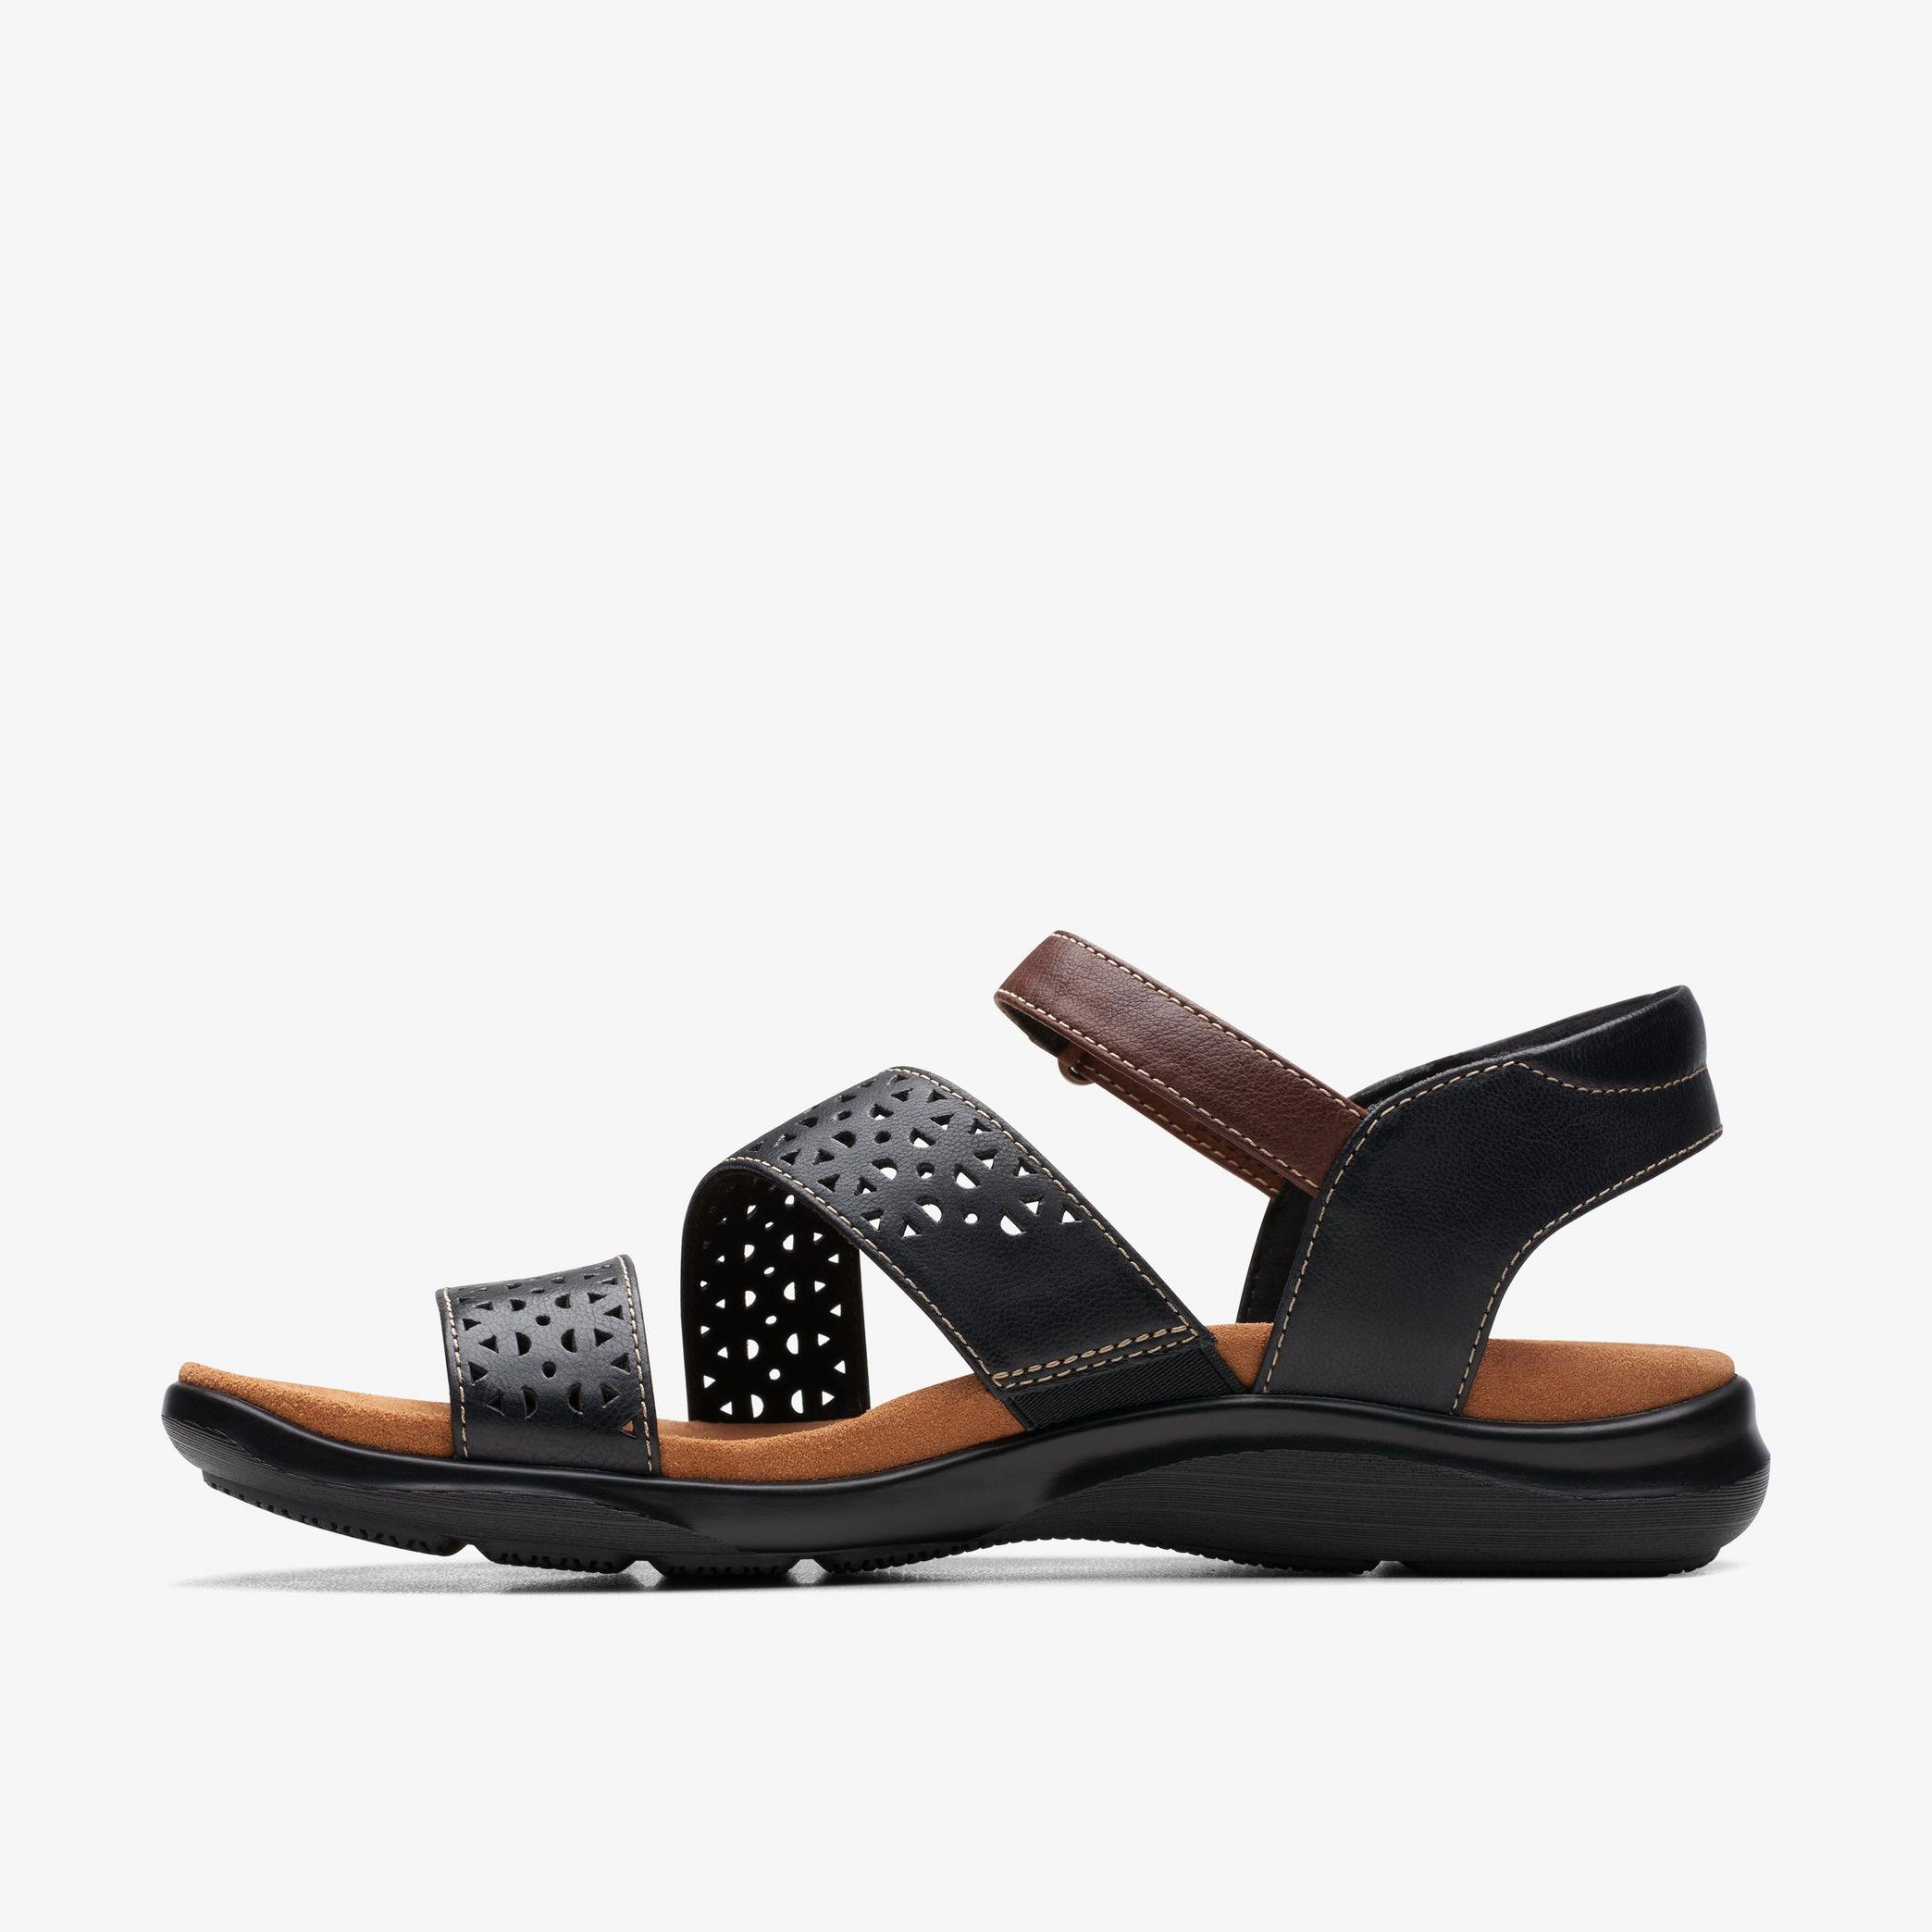 Kitly Way Black Leather Flat Sandals, view 2 of 6